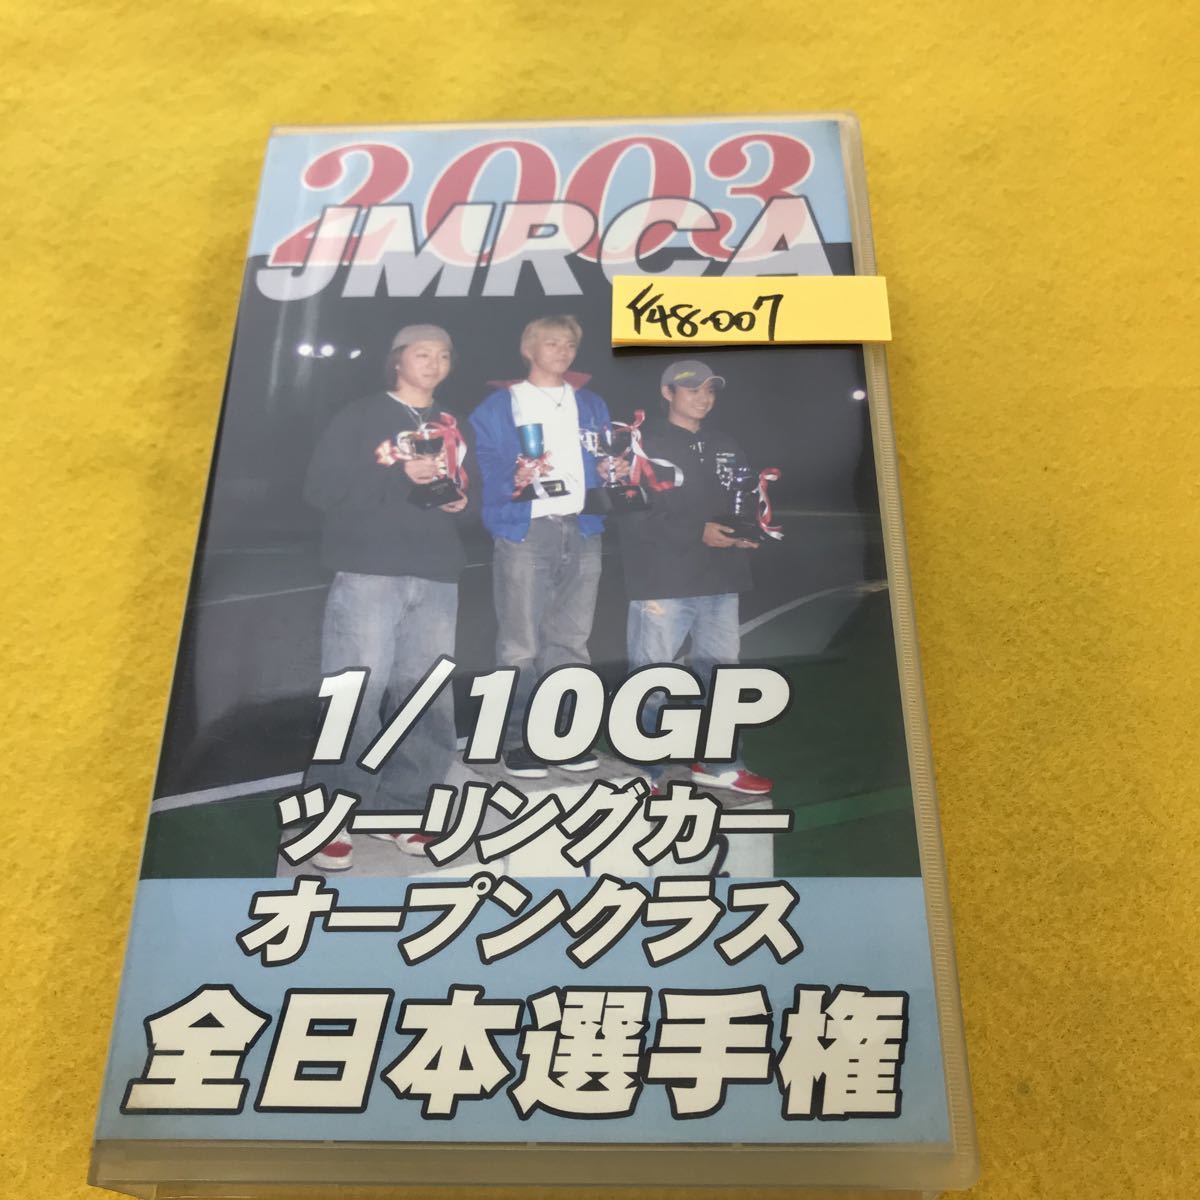 F48-007 2003 JMRCA 1/10 GP touring car open Class all Japan player right VHS60 minute 